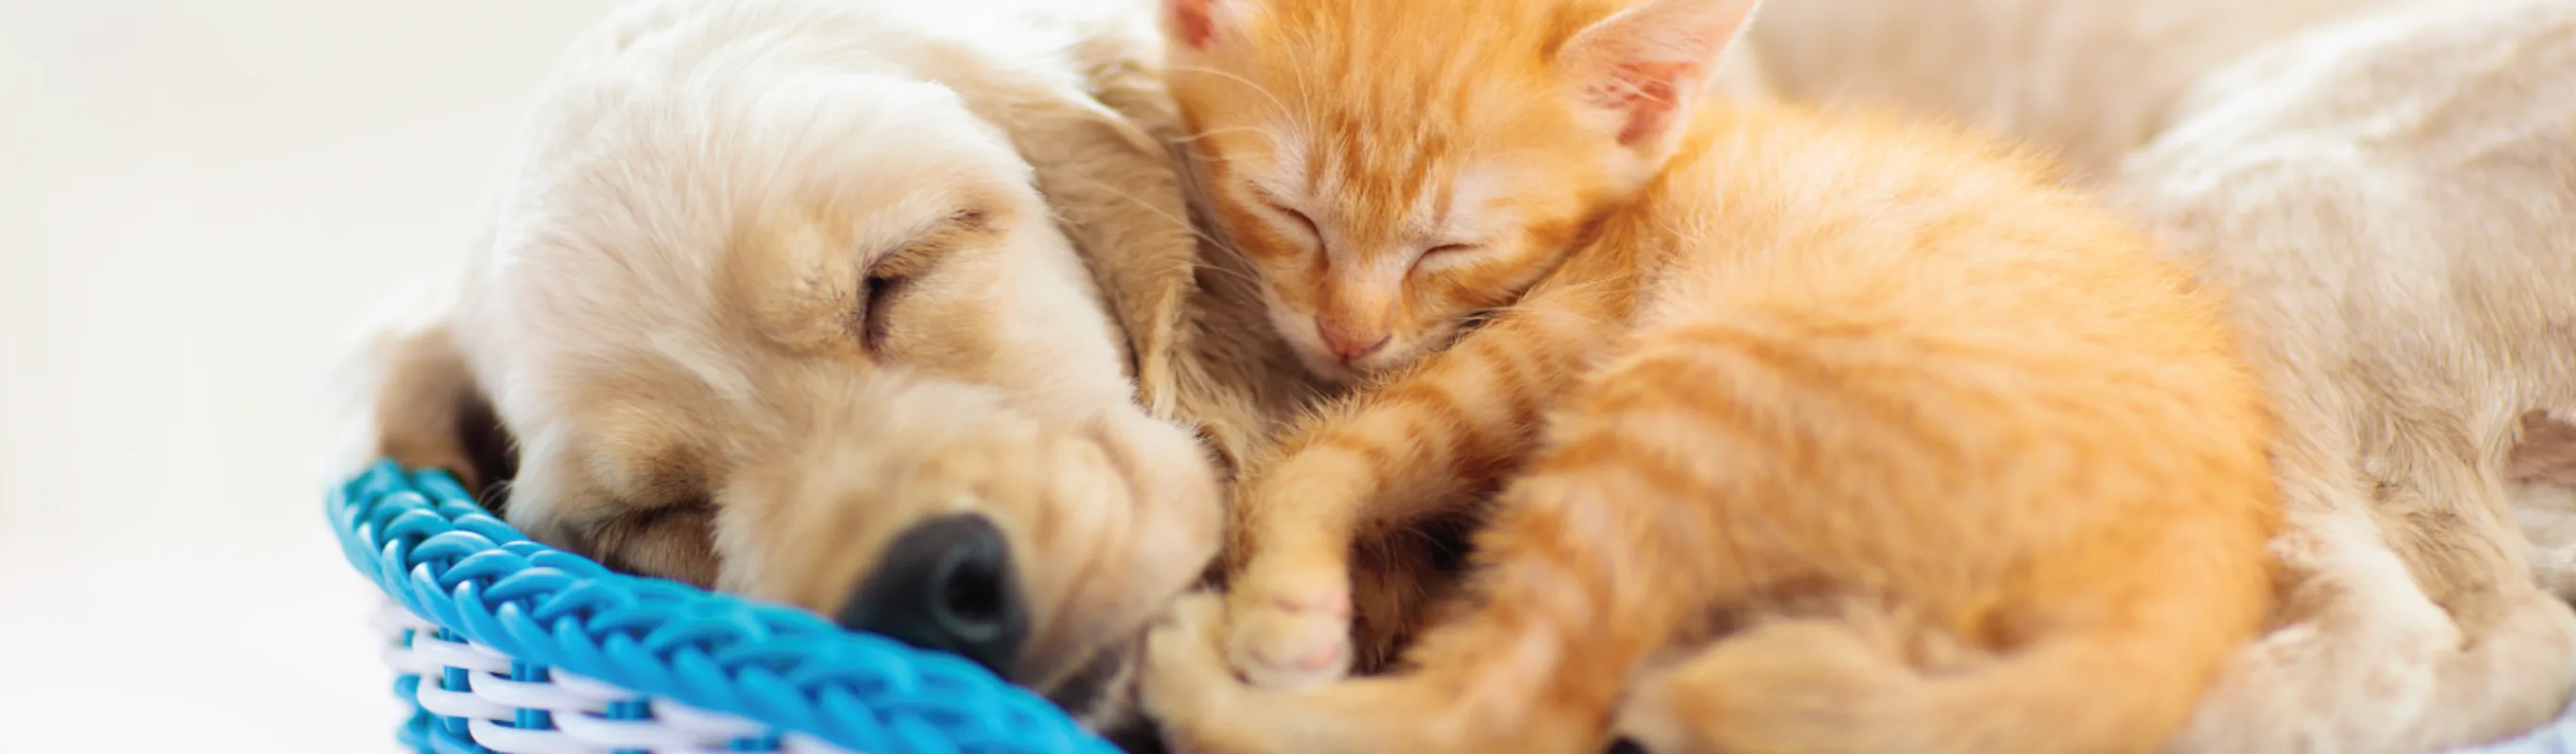 DOG AND CAT LAYING TOGETHER